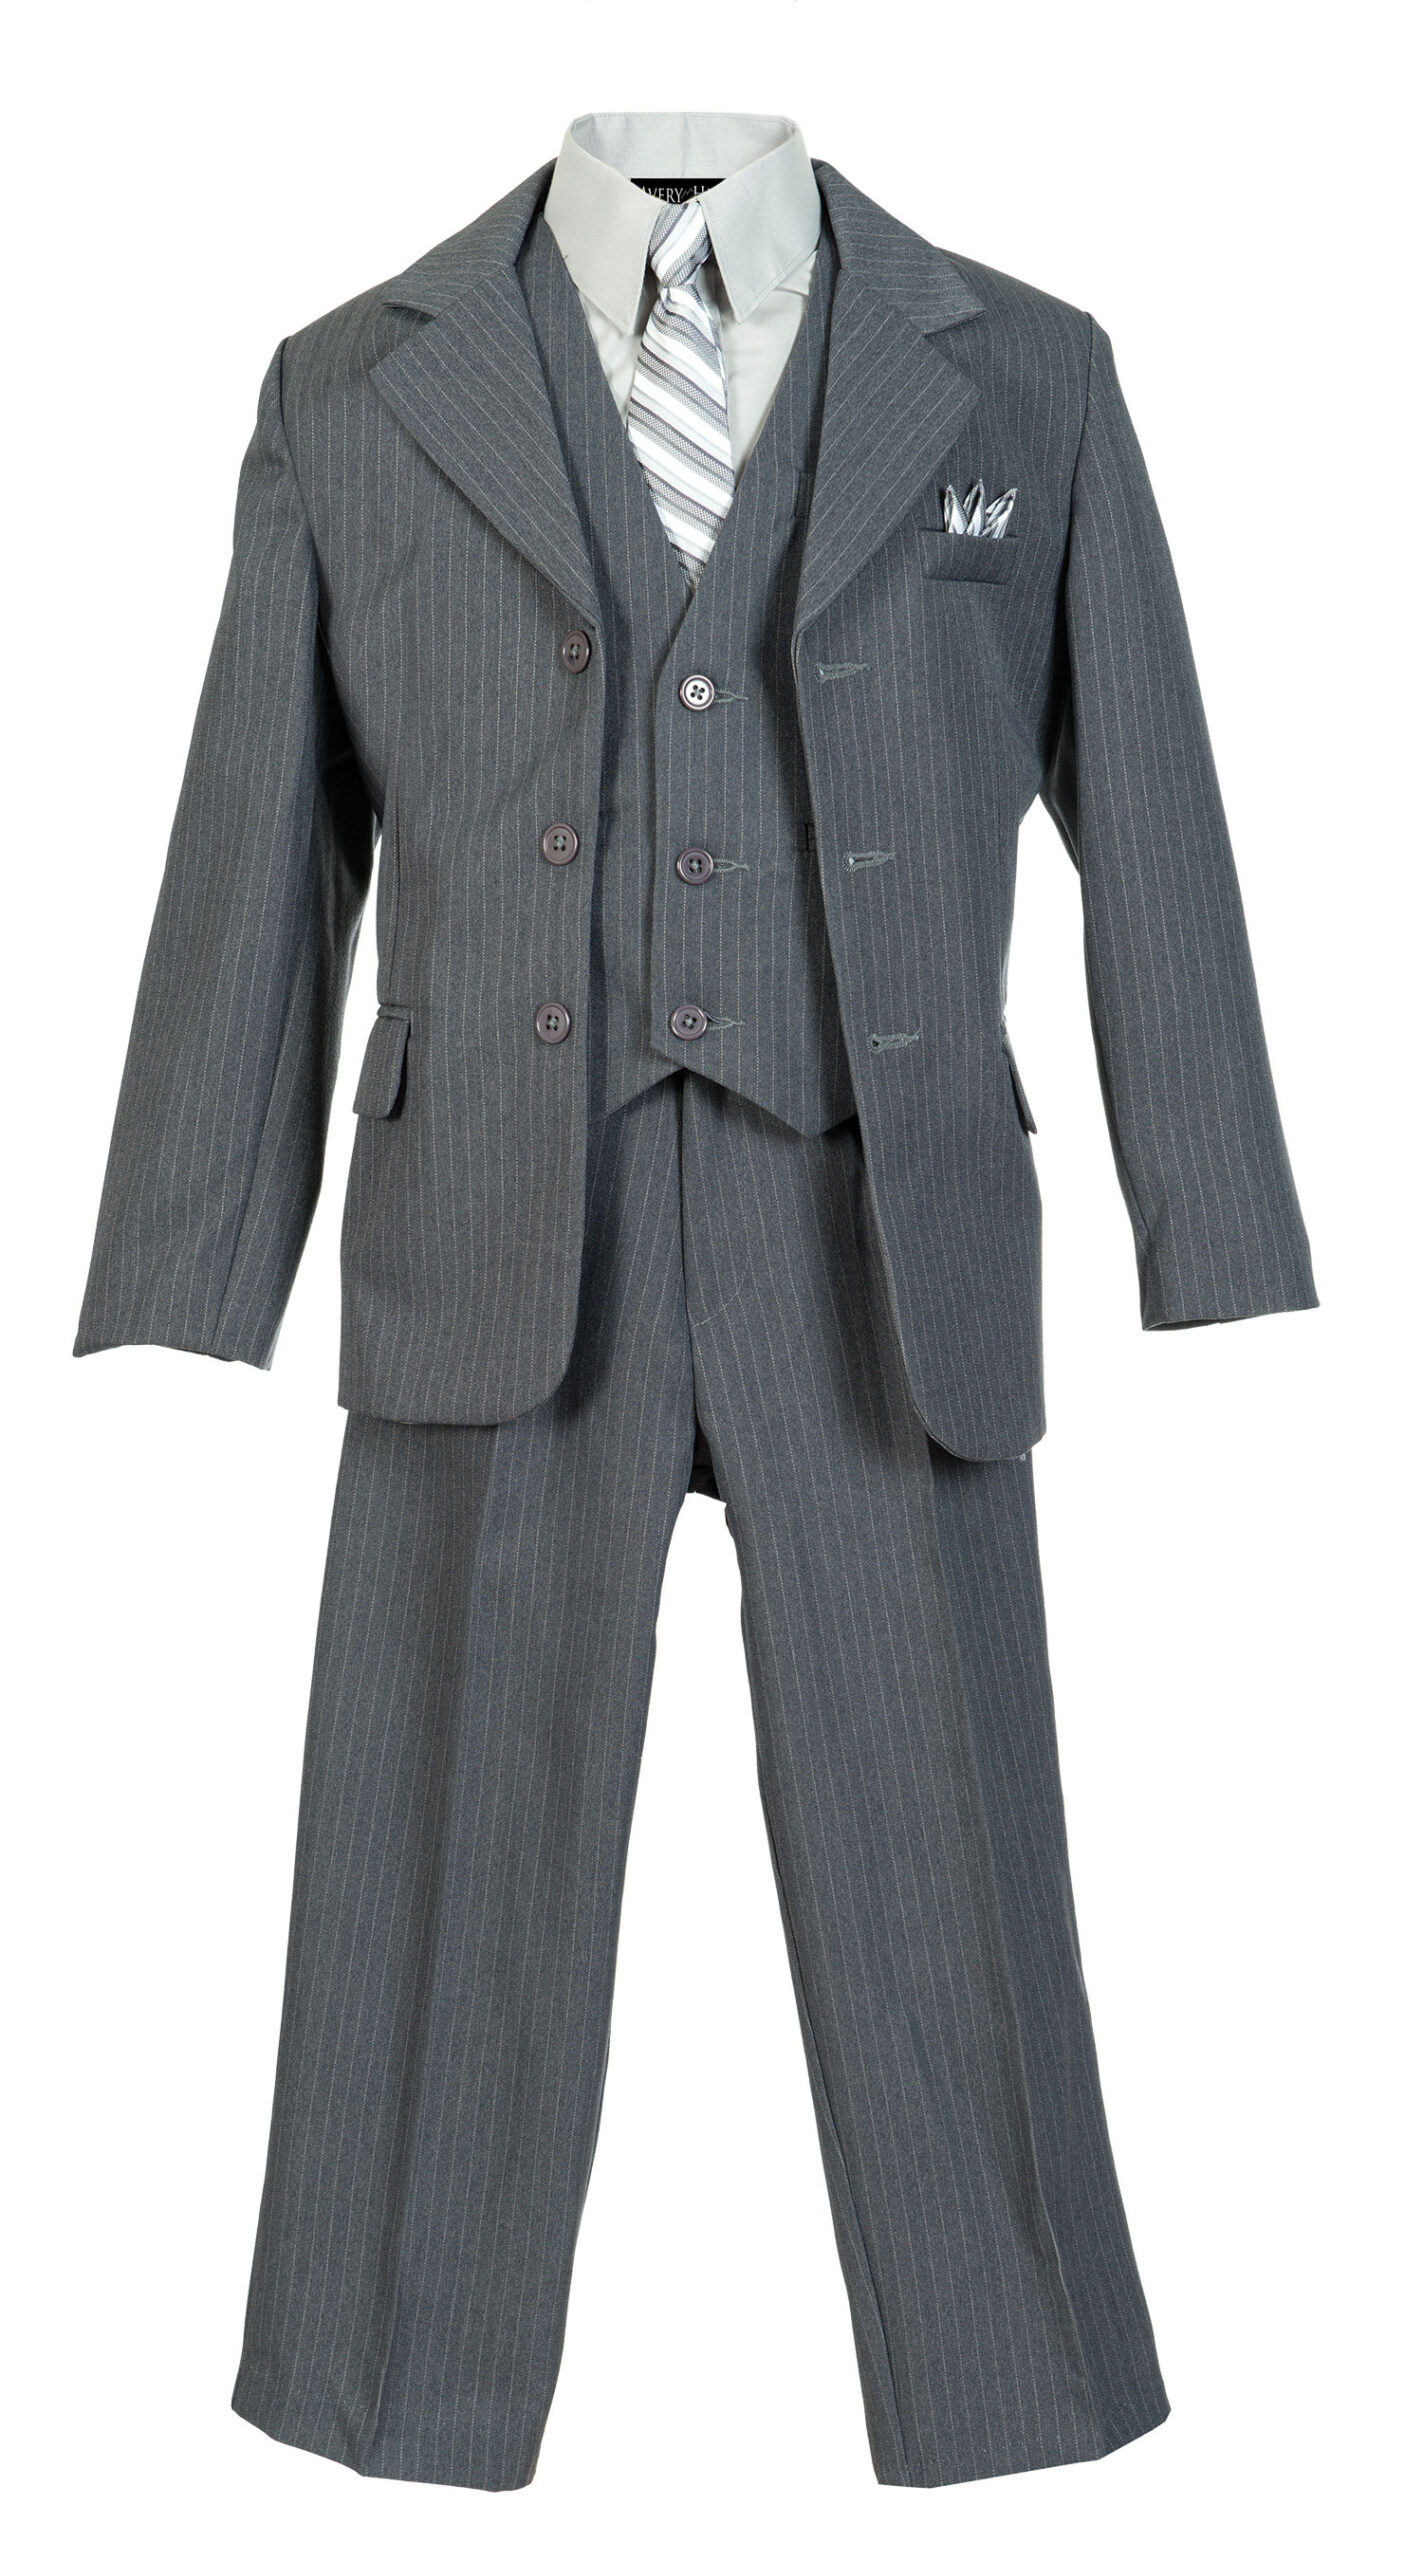 Boys Pinstripe Suit Set with Matching Tie LTGY 14